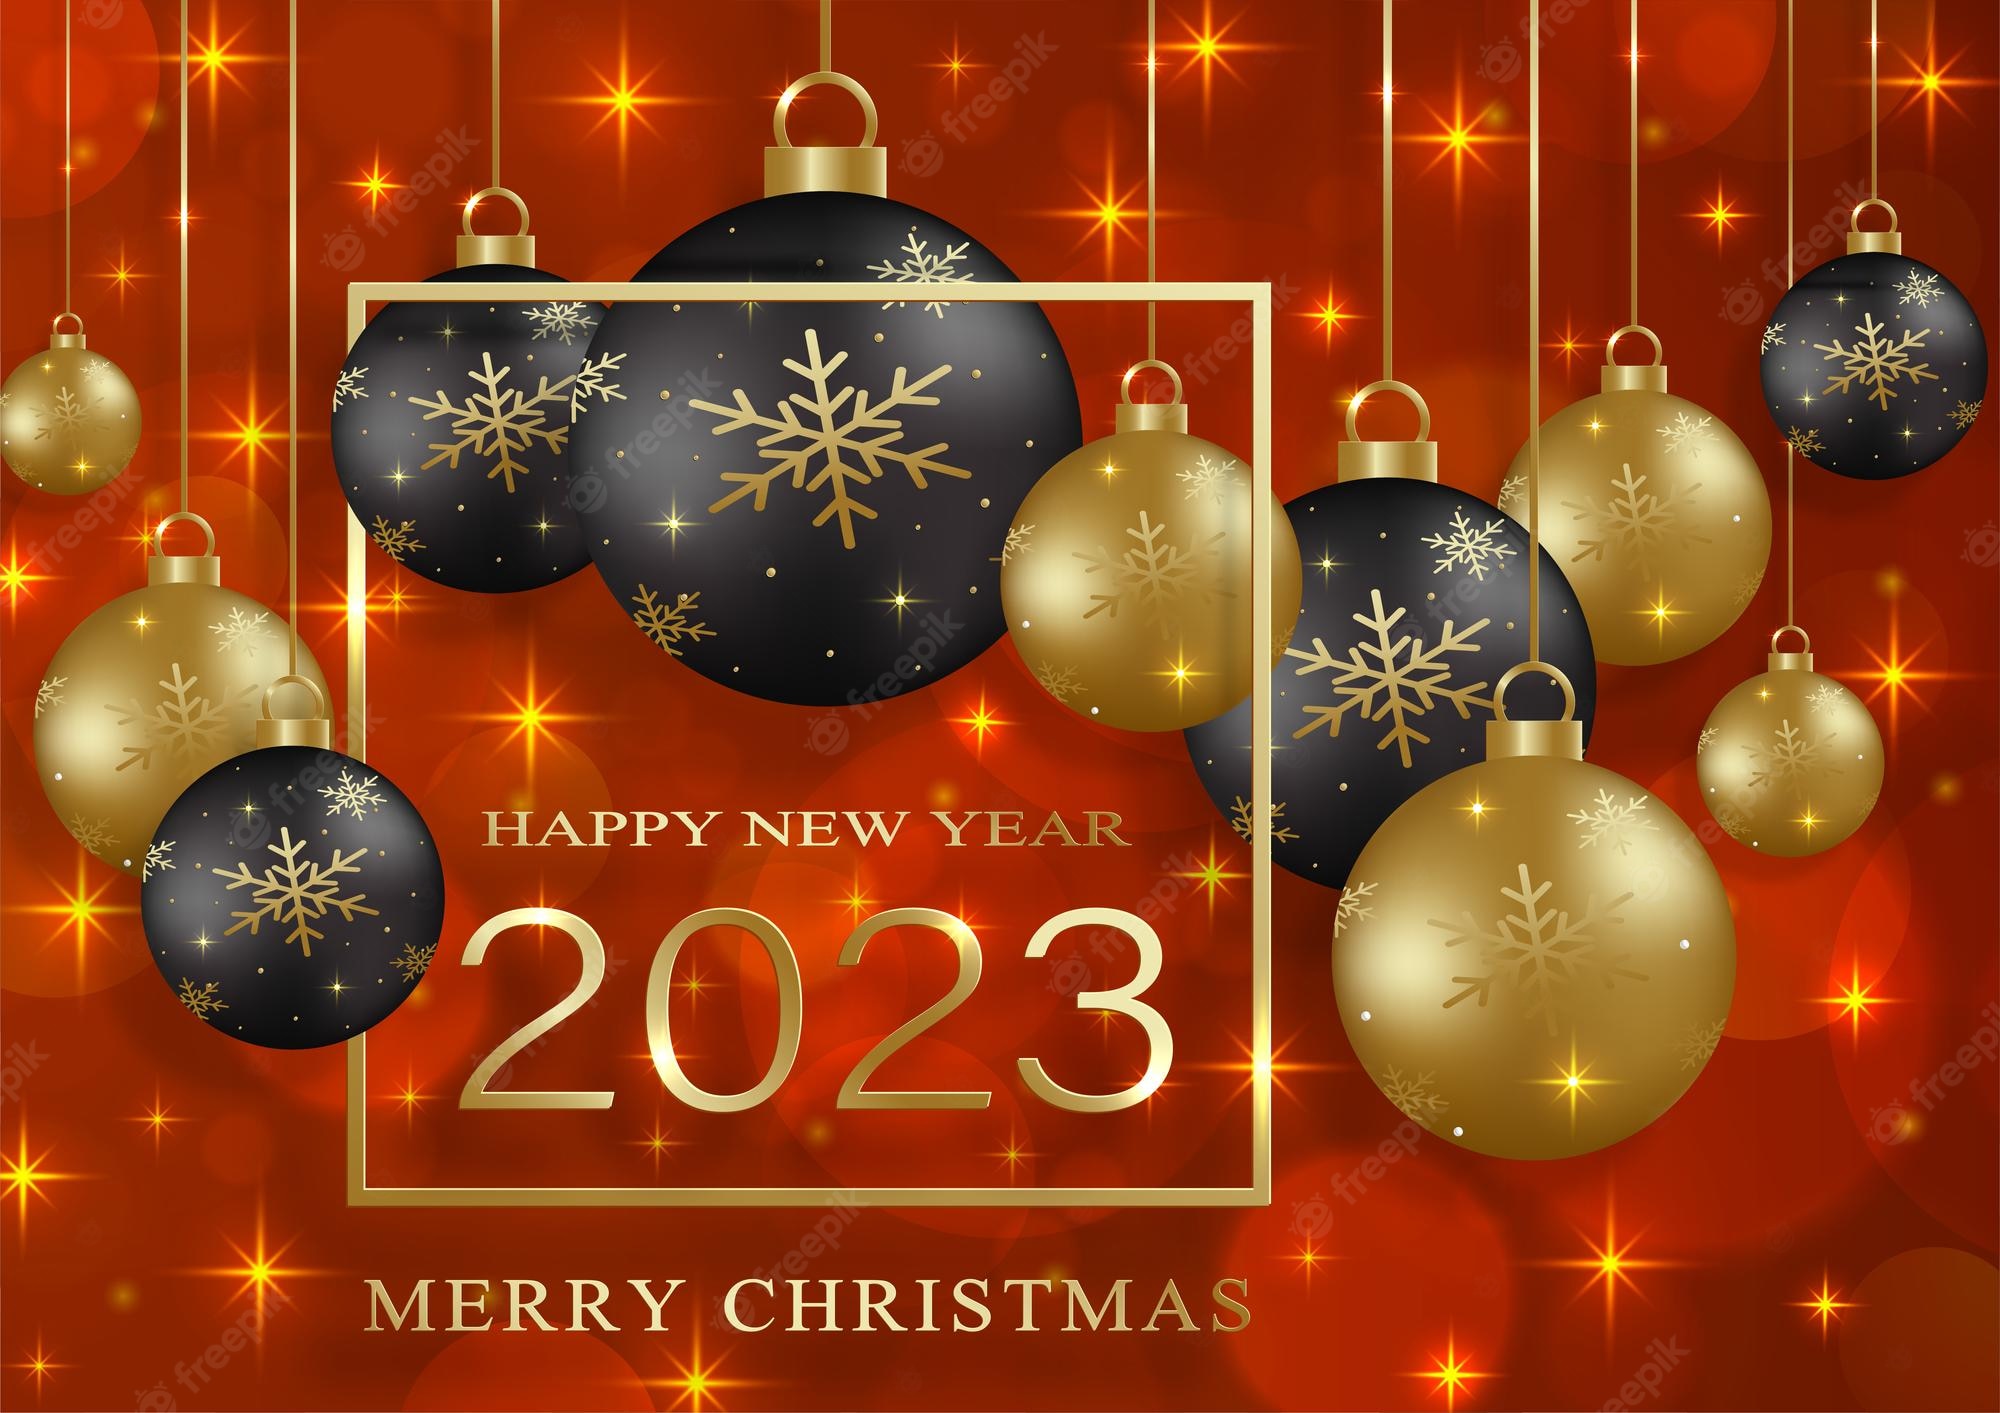 Premium Vector. Happy new year 2023 festive pattern on color background